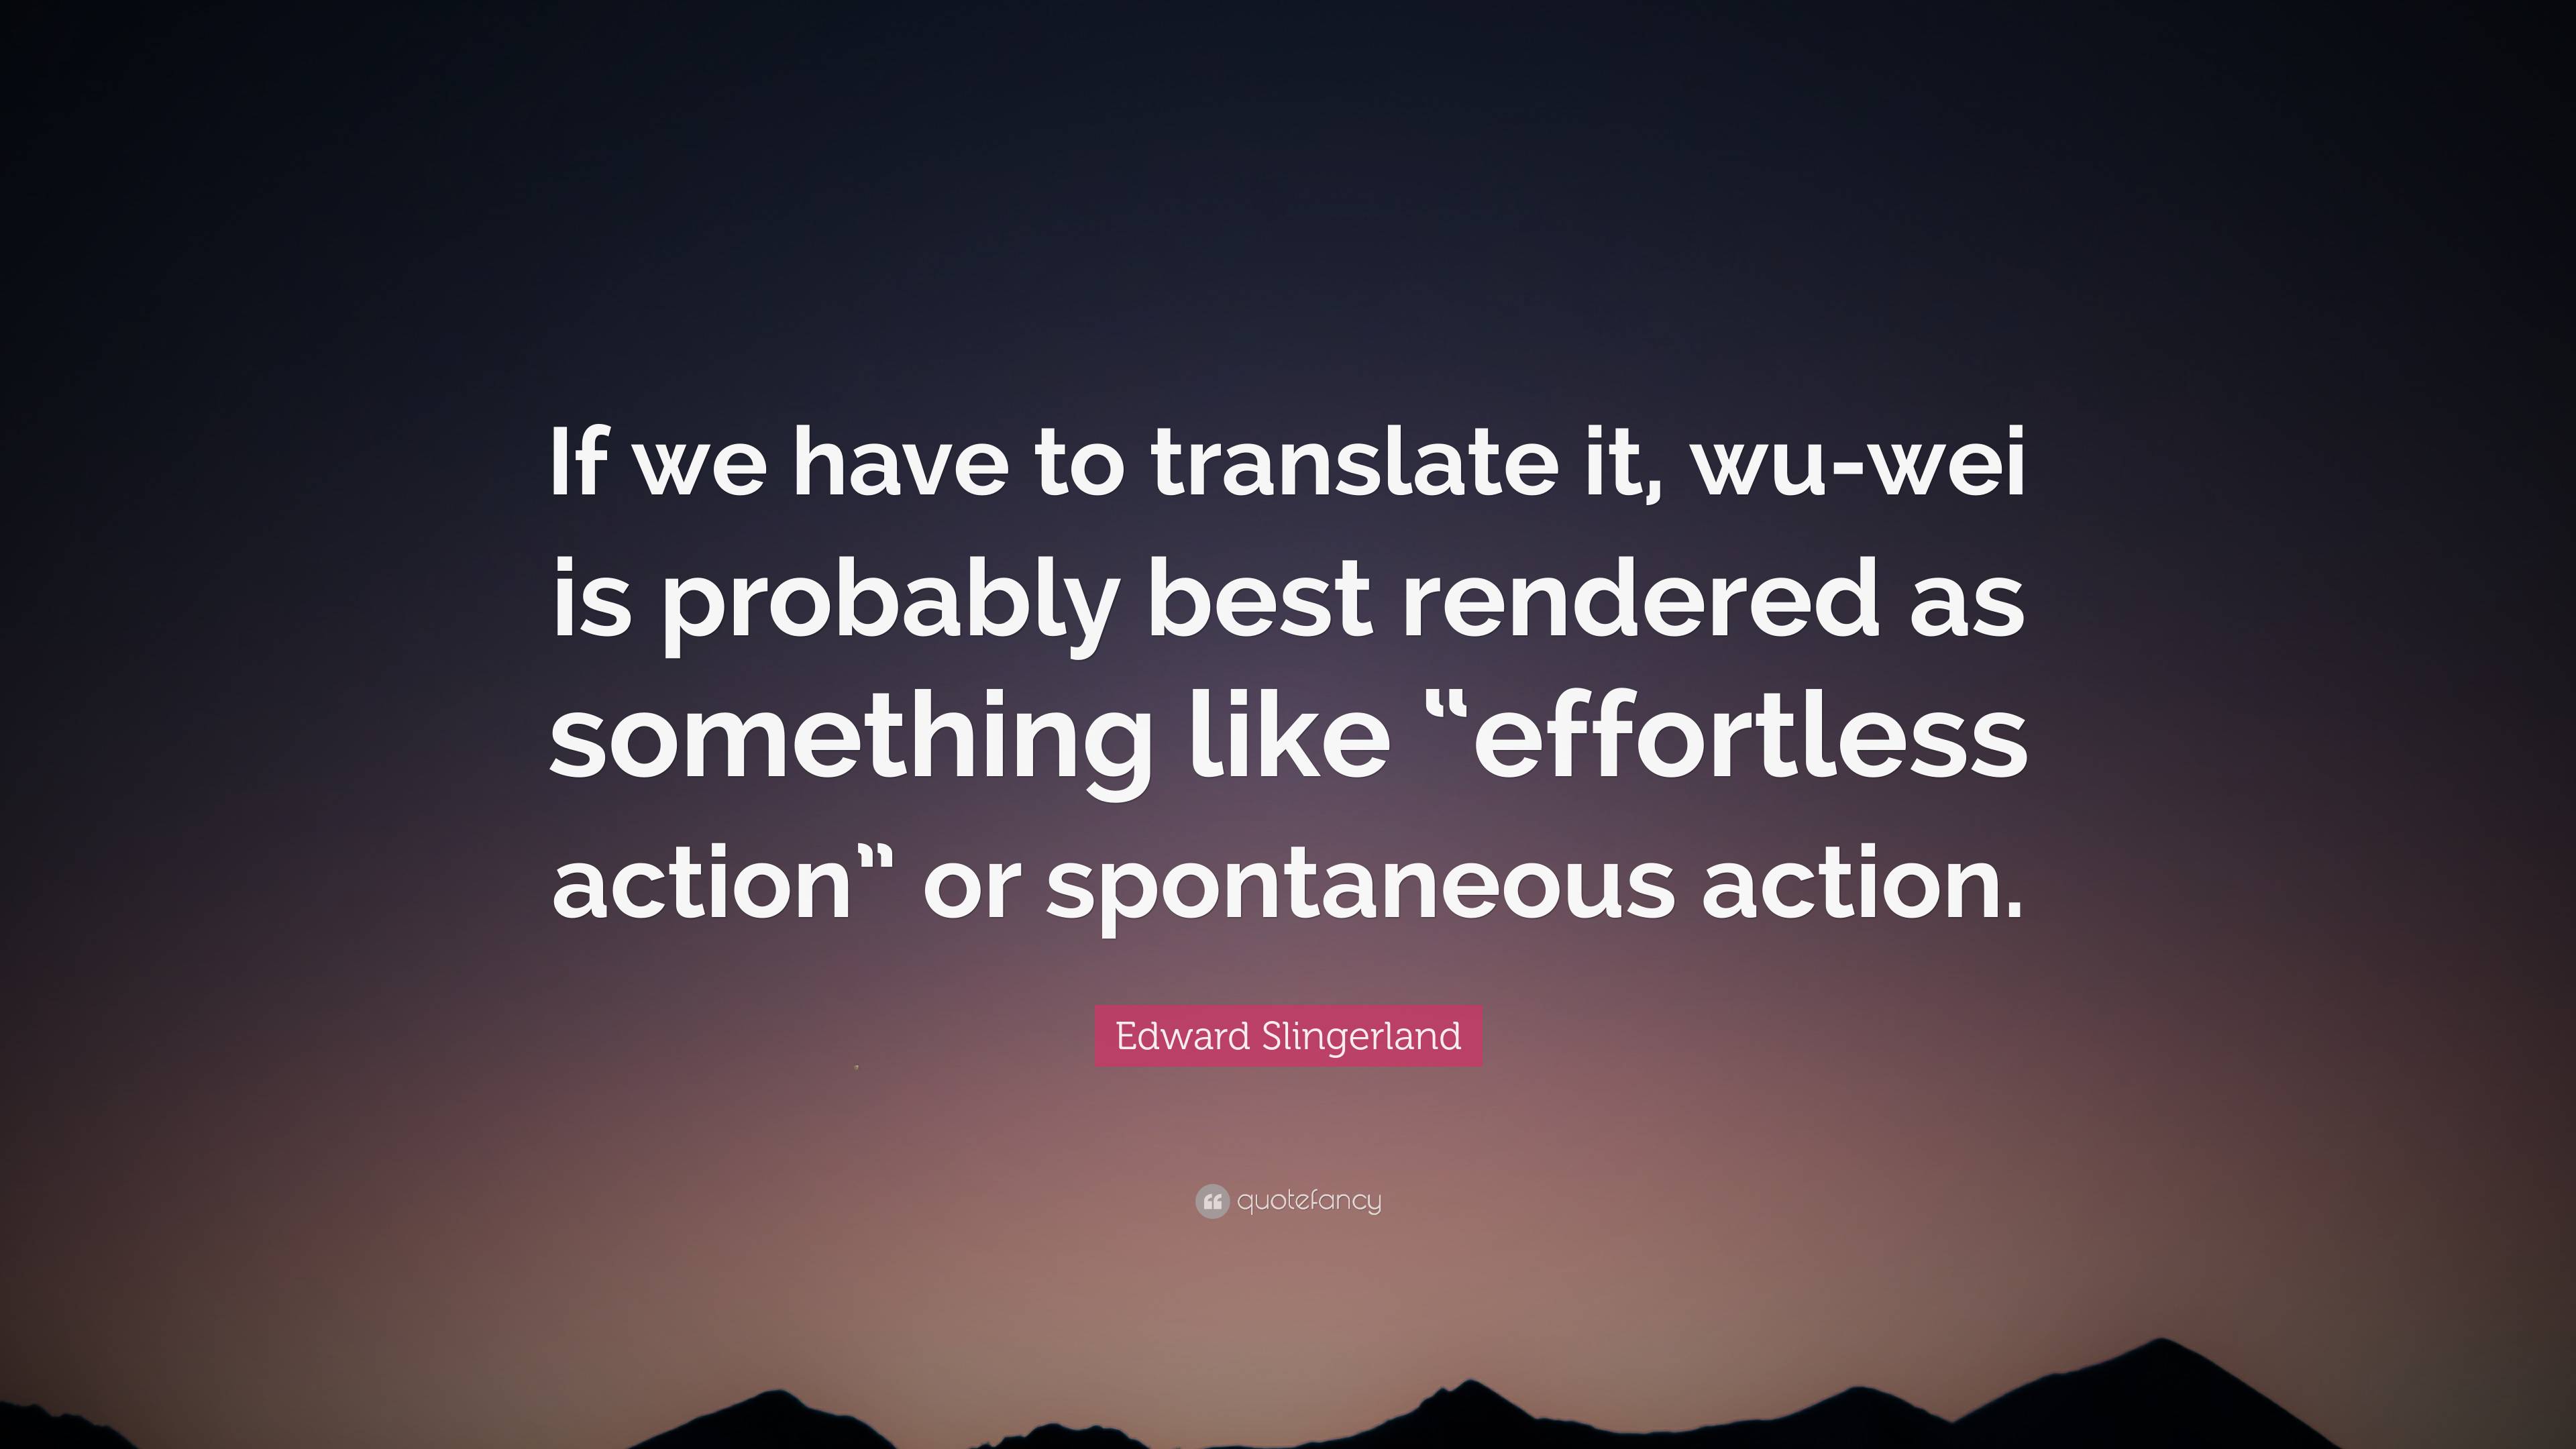 Edward Slingerland Quote: “If we have to translate it, wu-wei is probably  best rendered as something like “effortless action” or spontaneous  action”